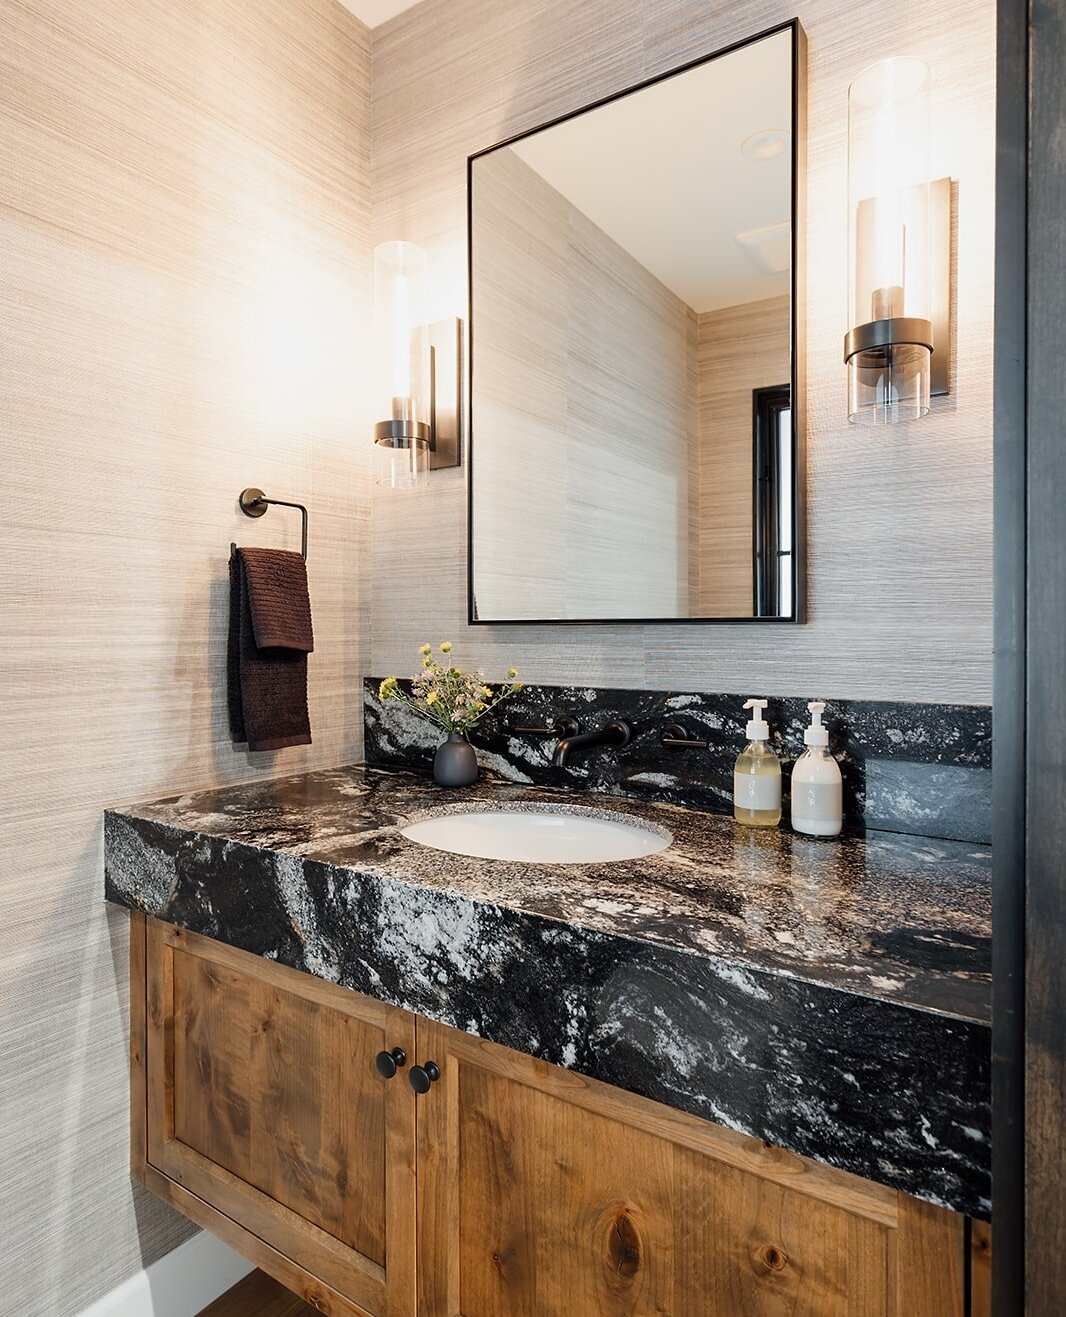 There's nothing better than a luxurious powder room!  This classic grasscloth and dramatic granite is 🔥⁠
⁠
Design: @snowcap_architecture⁠
Contractor: @insidetimerline⁠
Interiors: @studioludesign⁠
📸: @tahoephotographer⁠